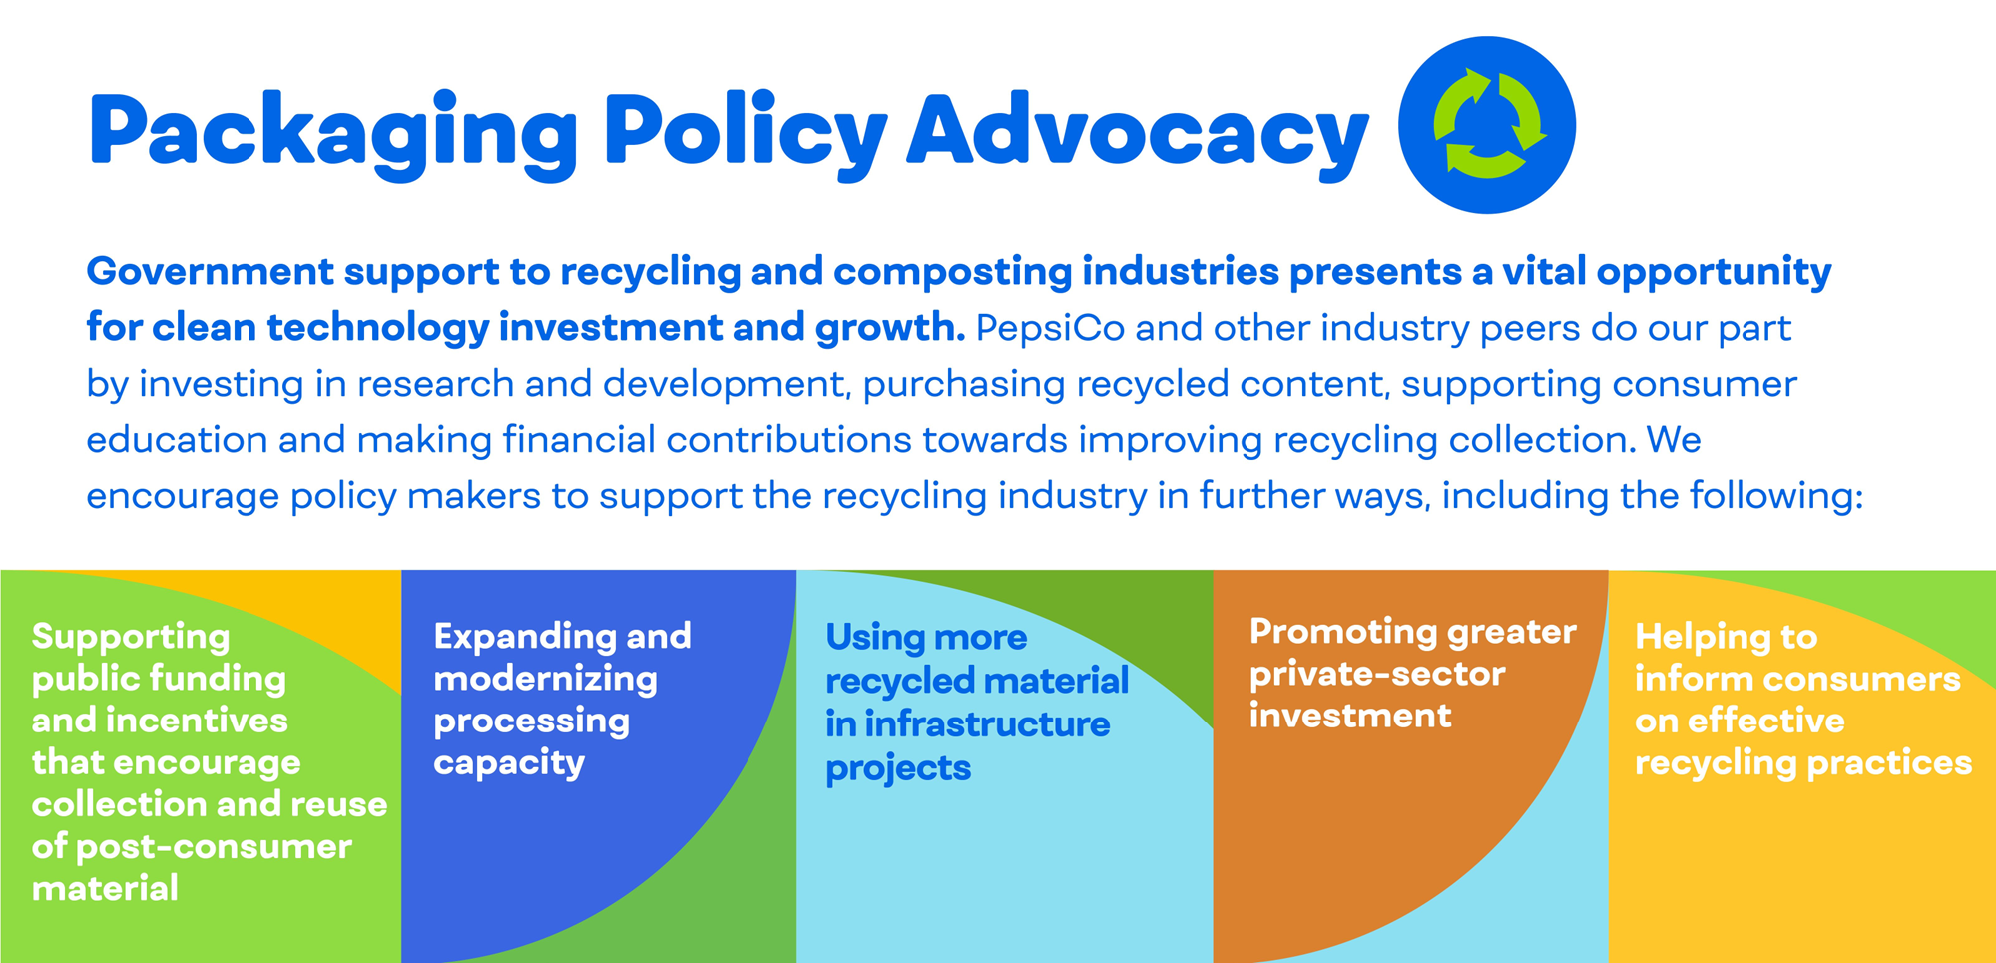 Packaging Policy Advocacy